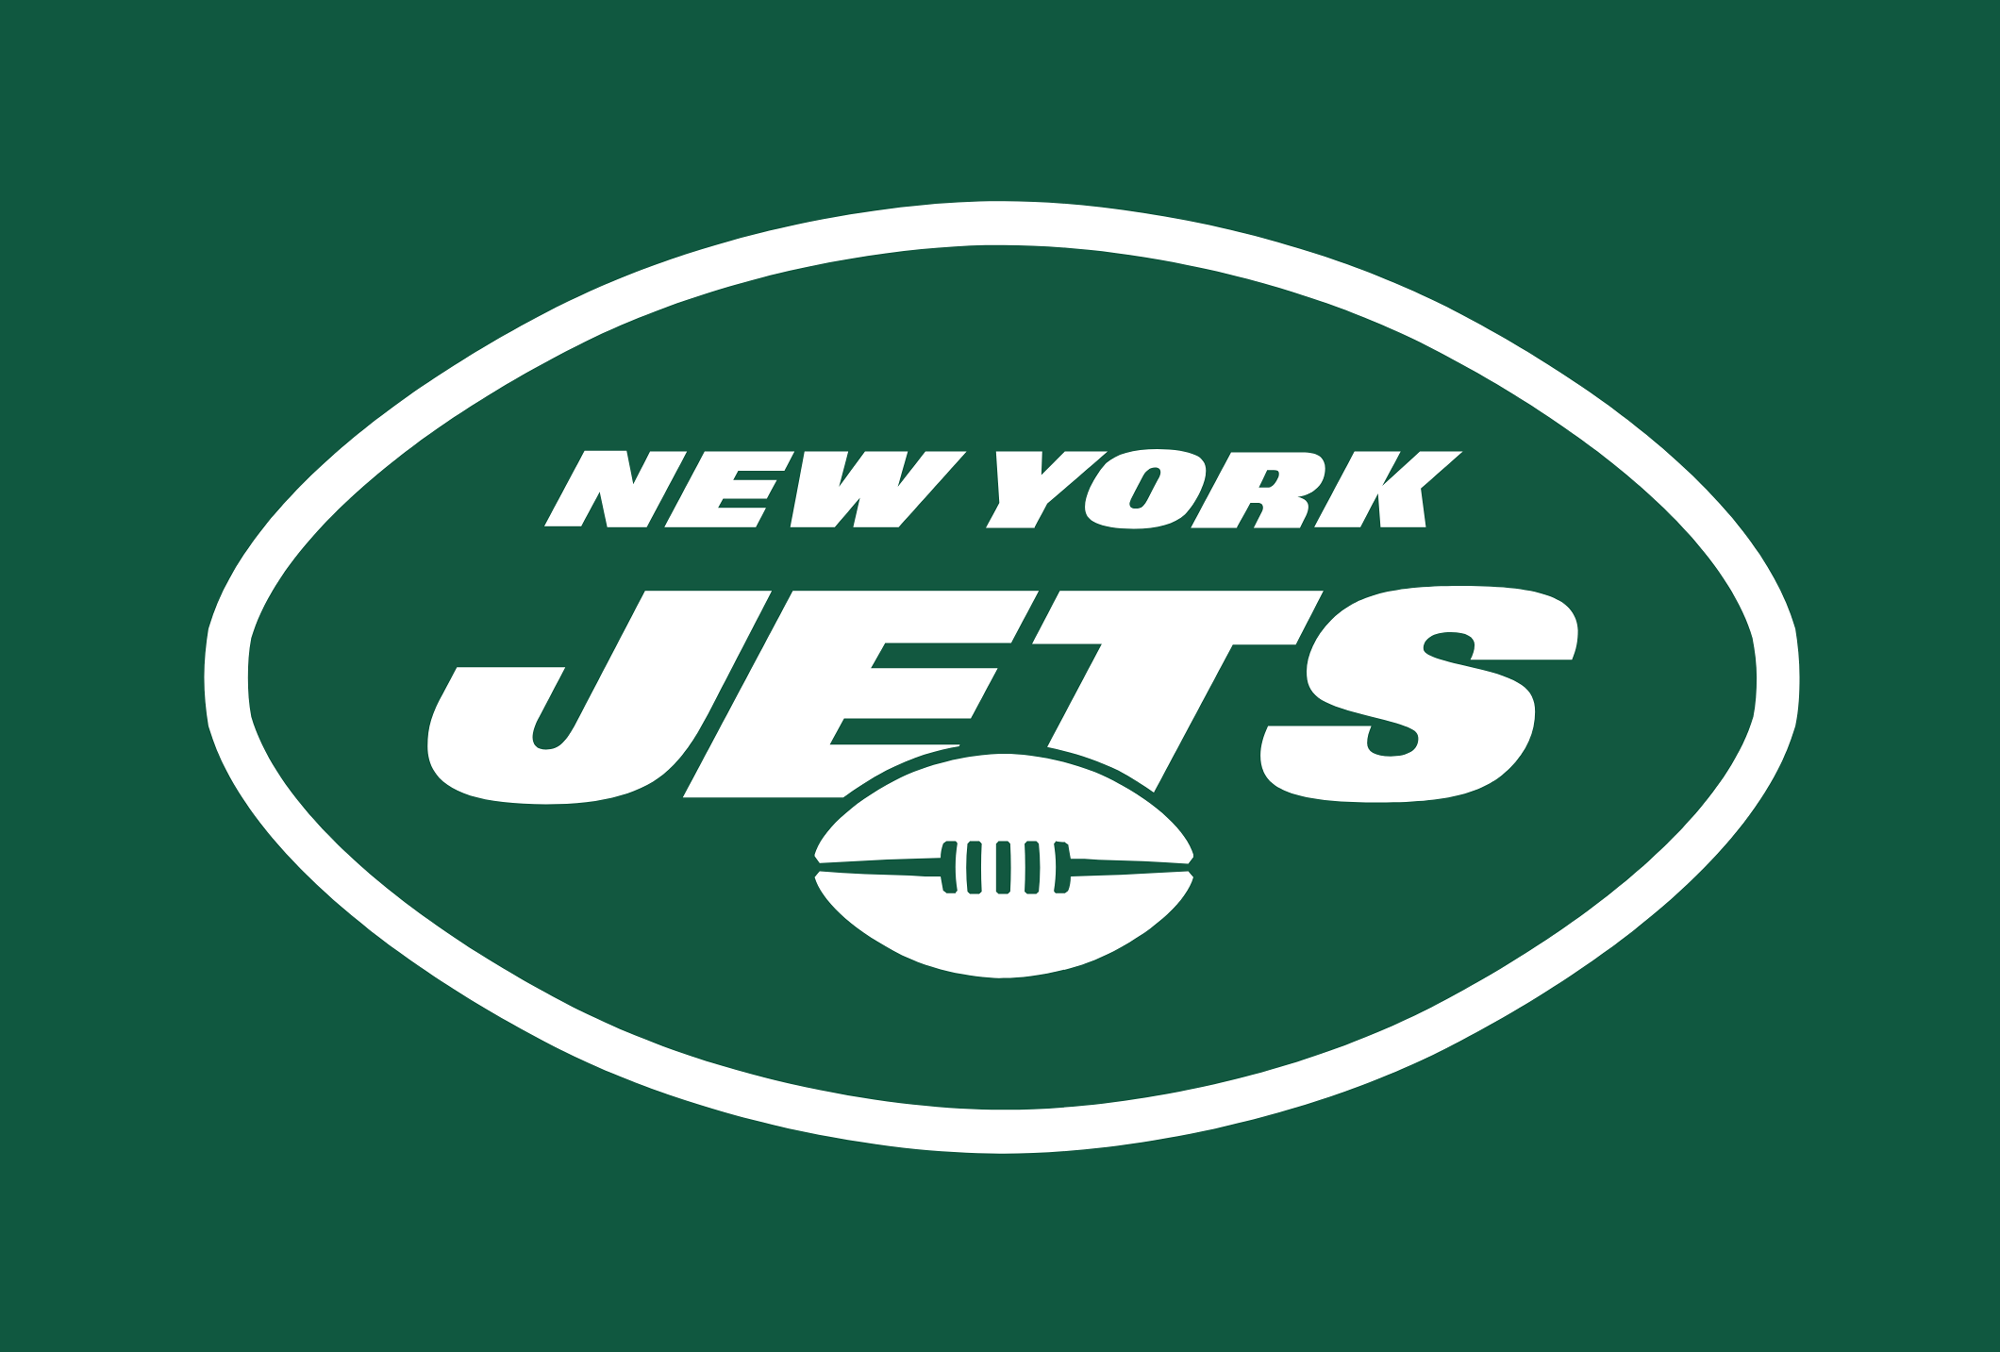 Nyjets Logo - Brand New: New Logo and Uniforms for New York Jets